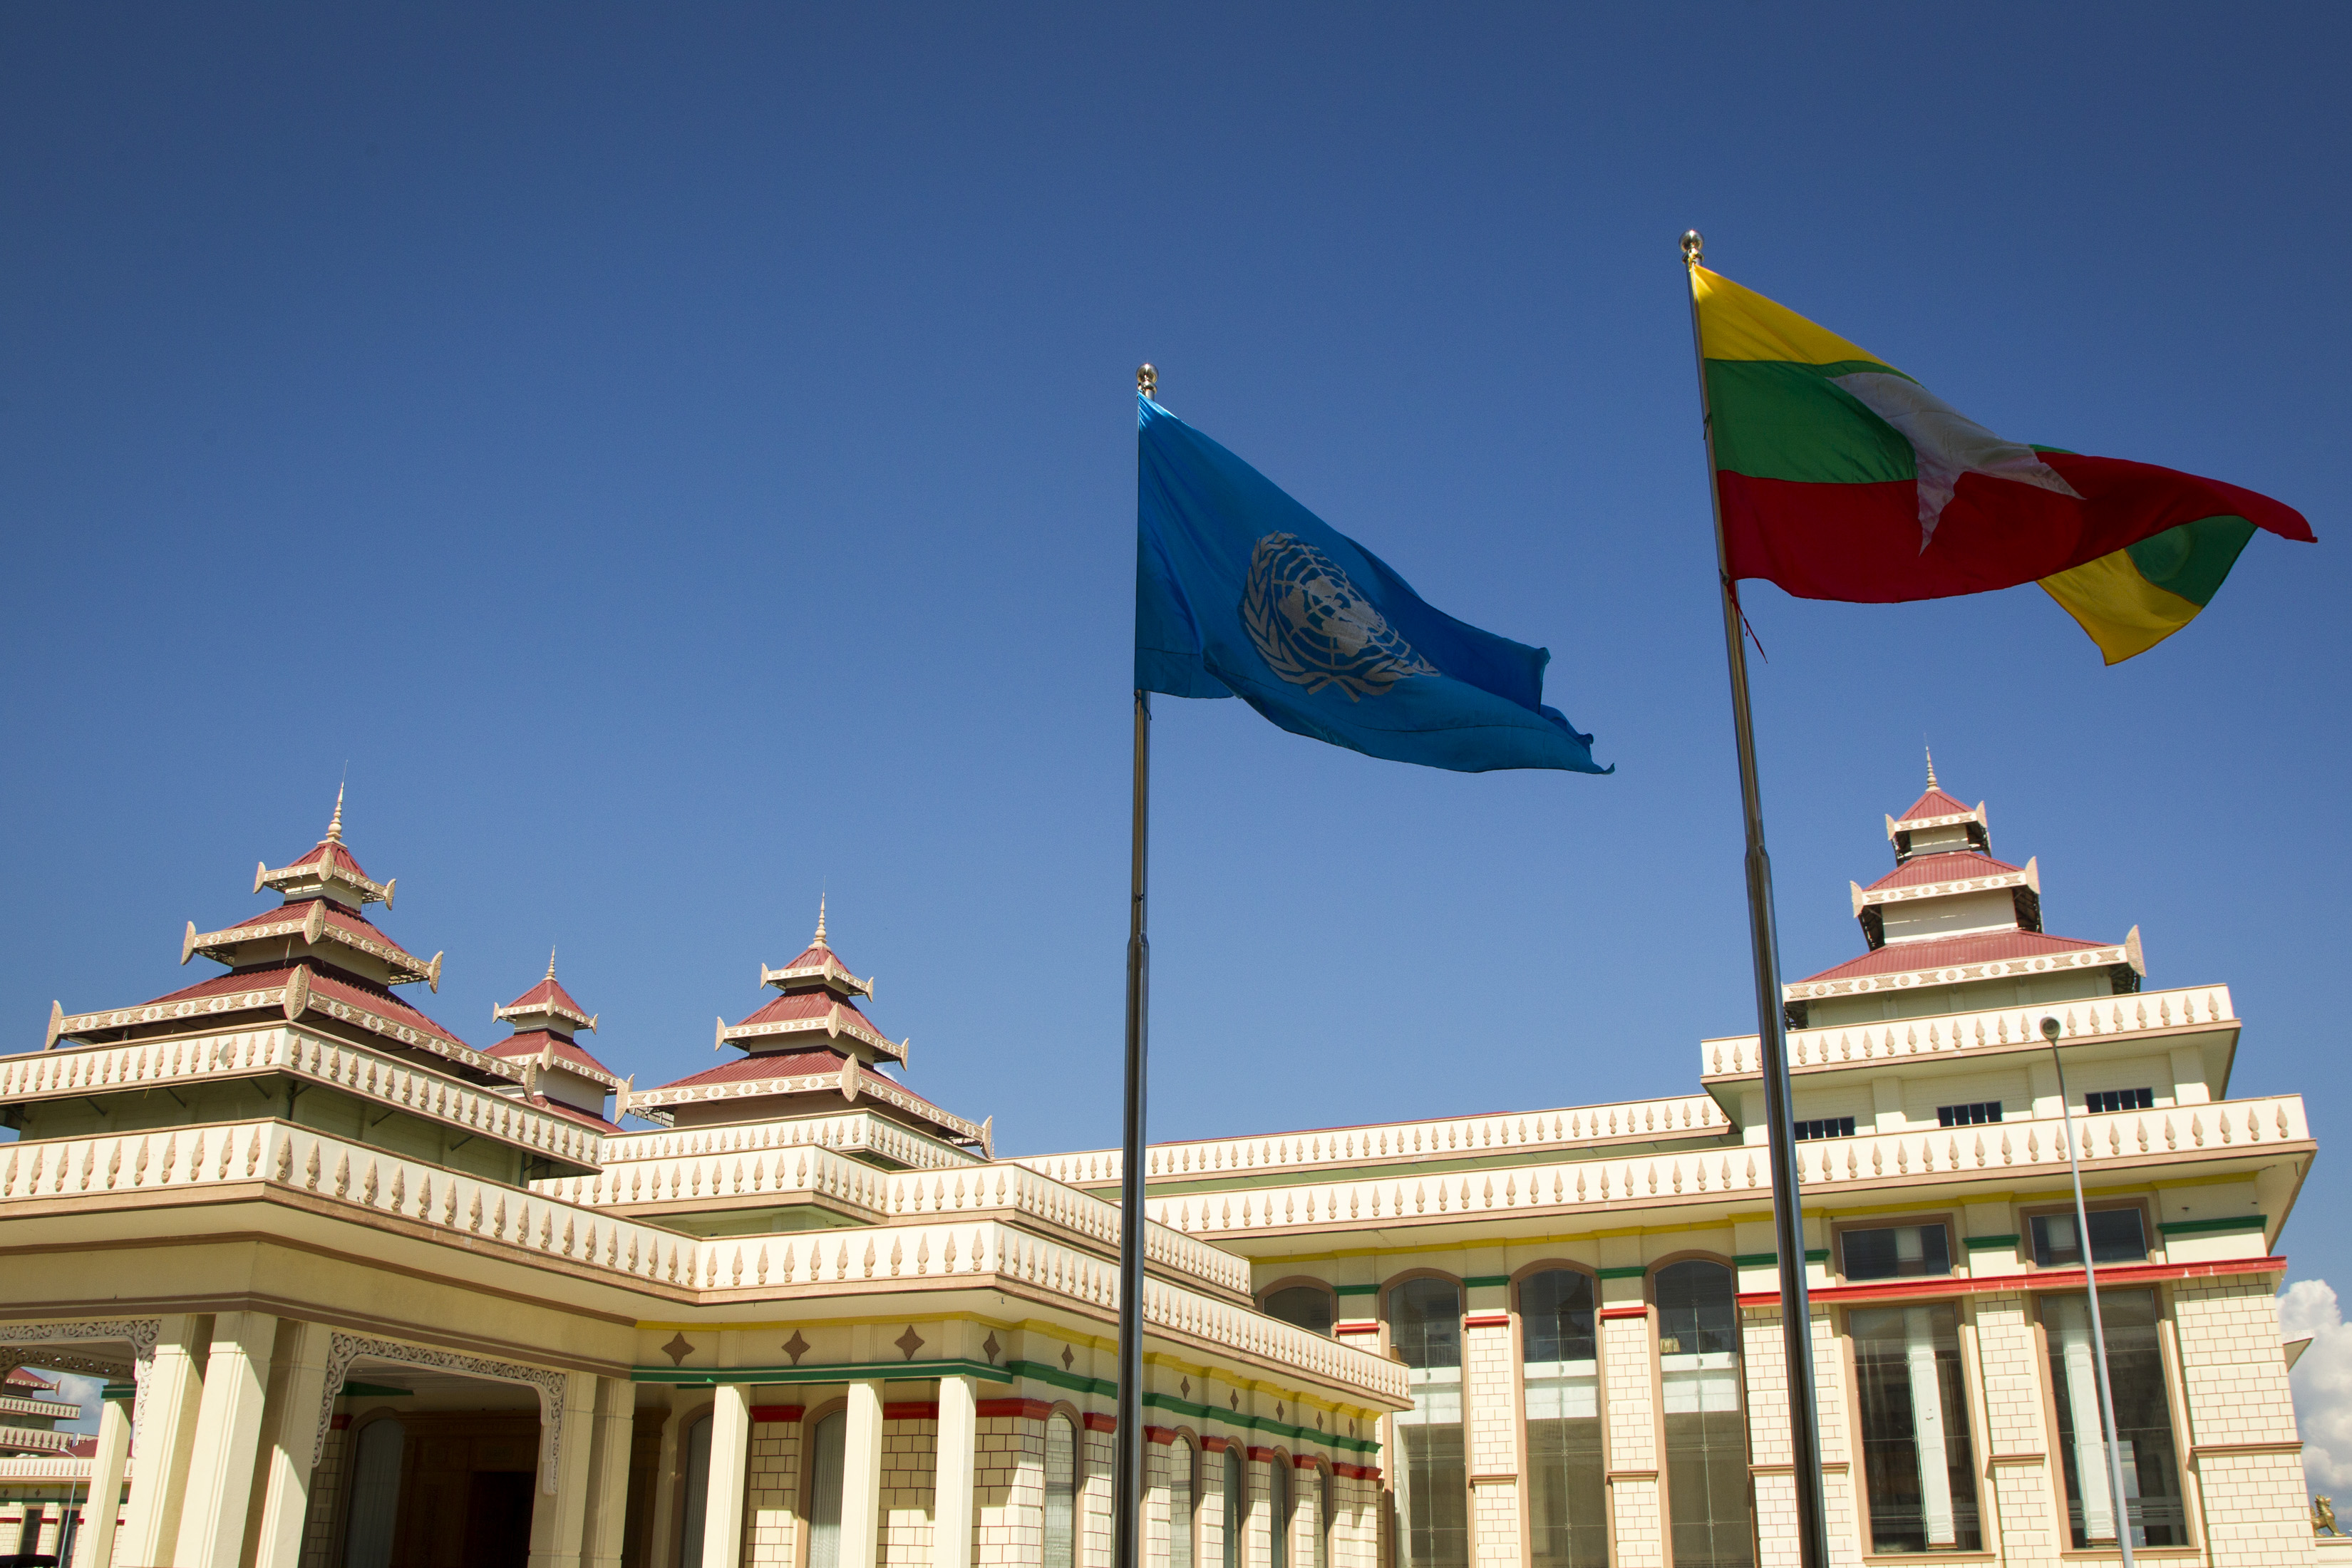 Parliament Building of Myanmar (photo credit: United Nations Photo/flickr)